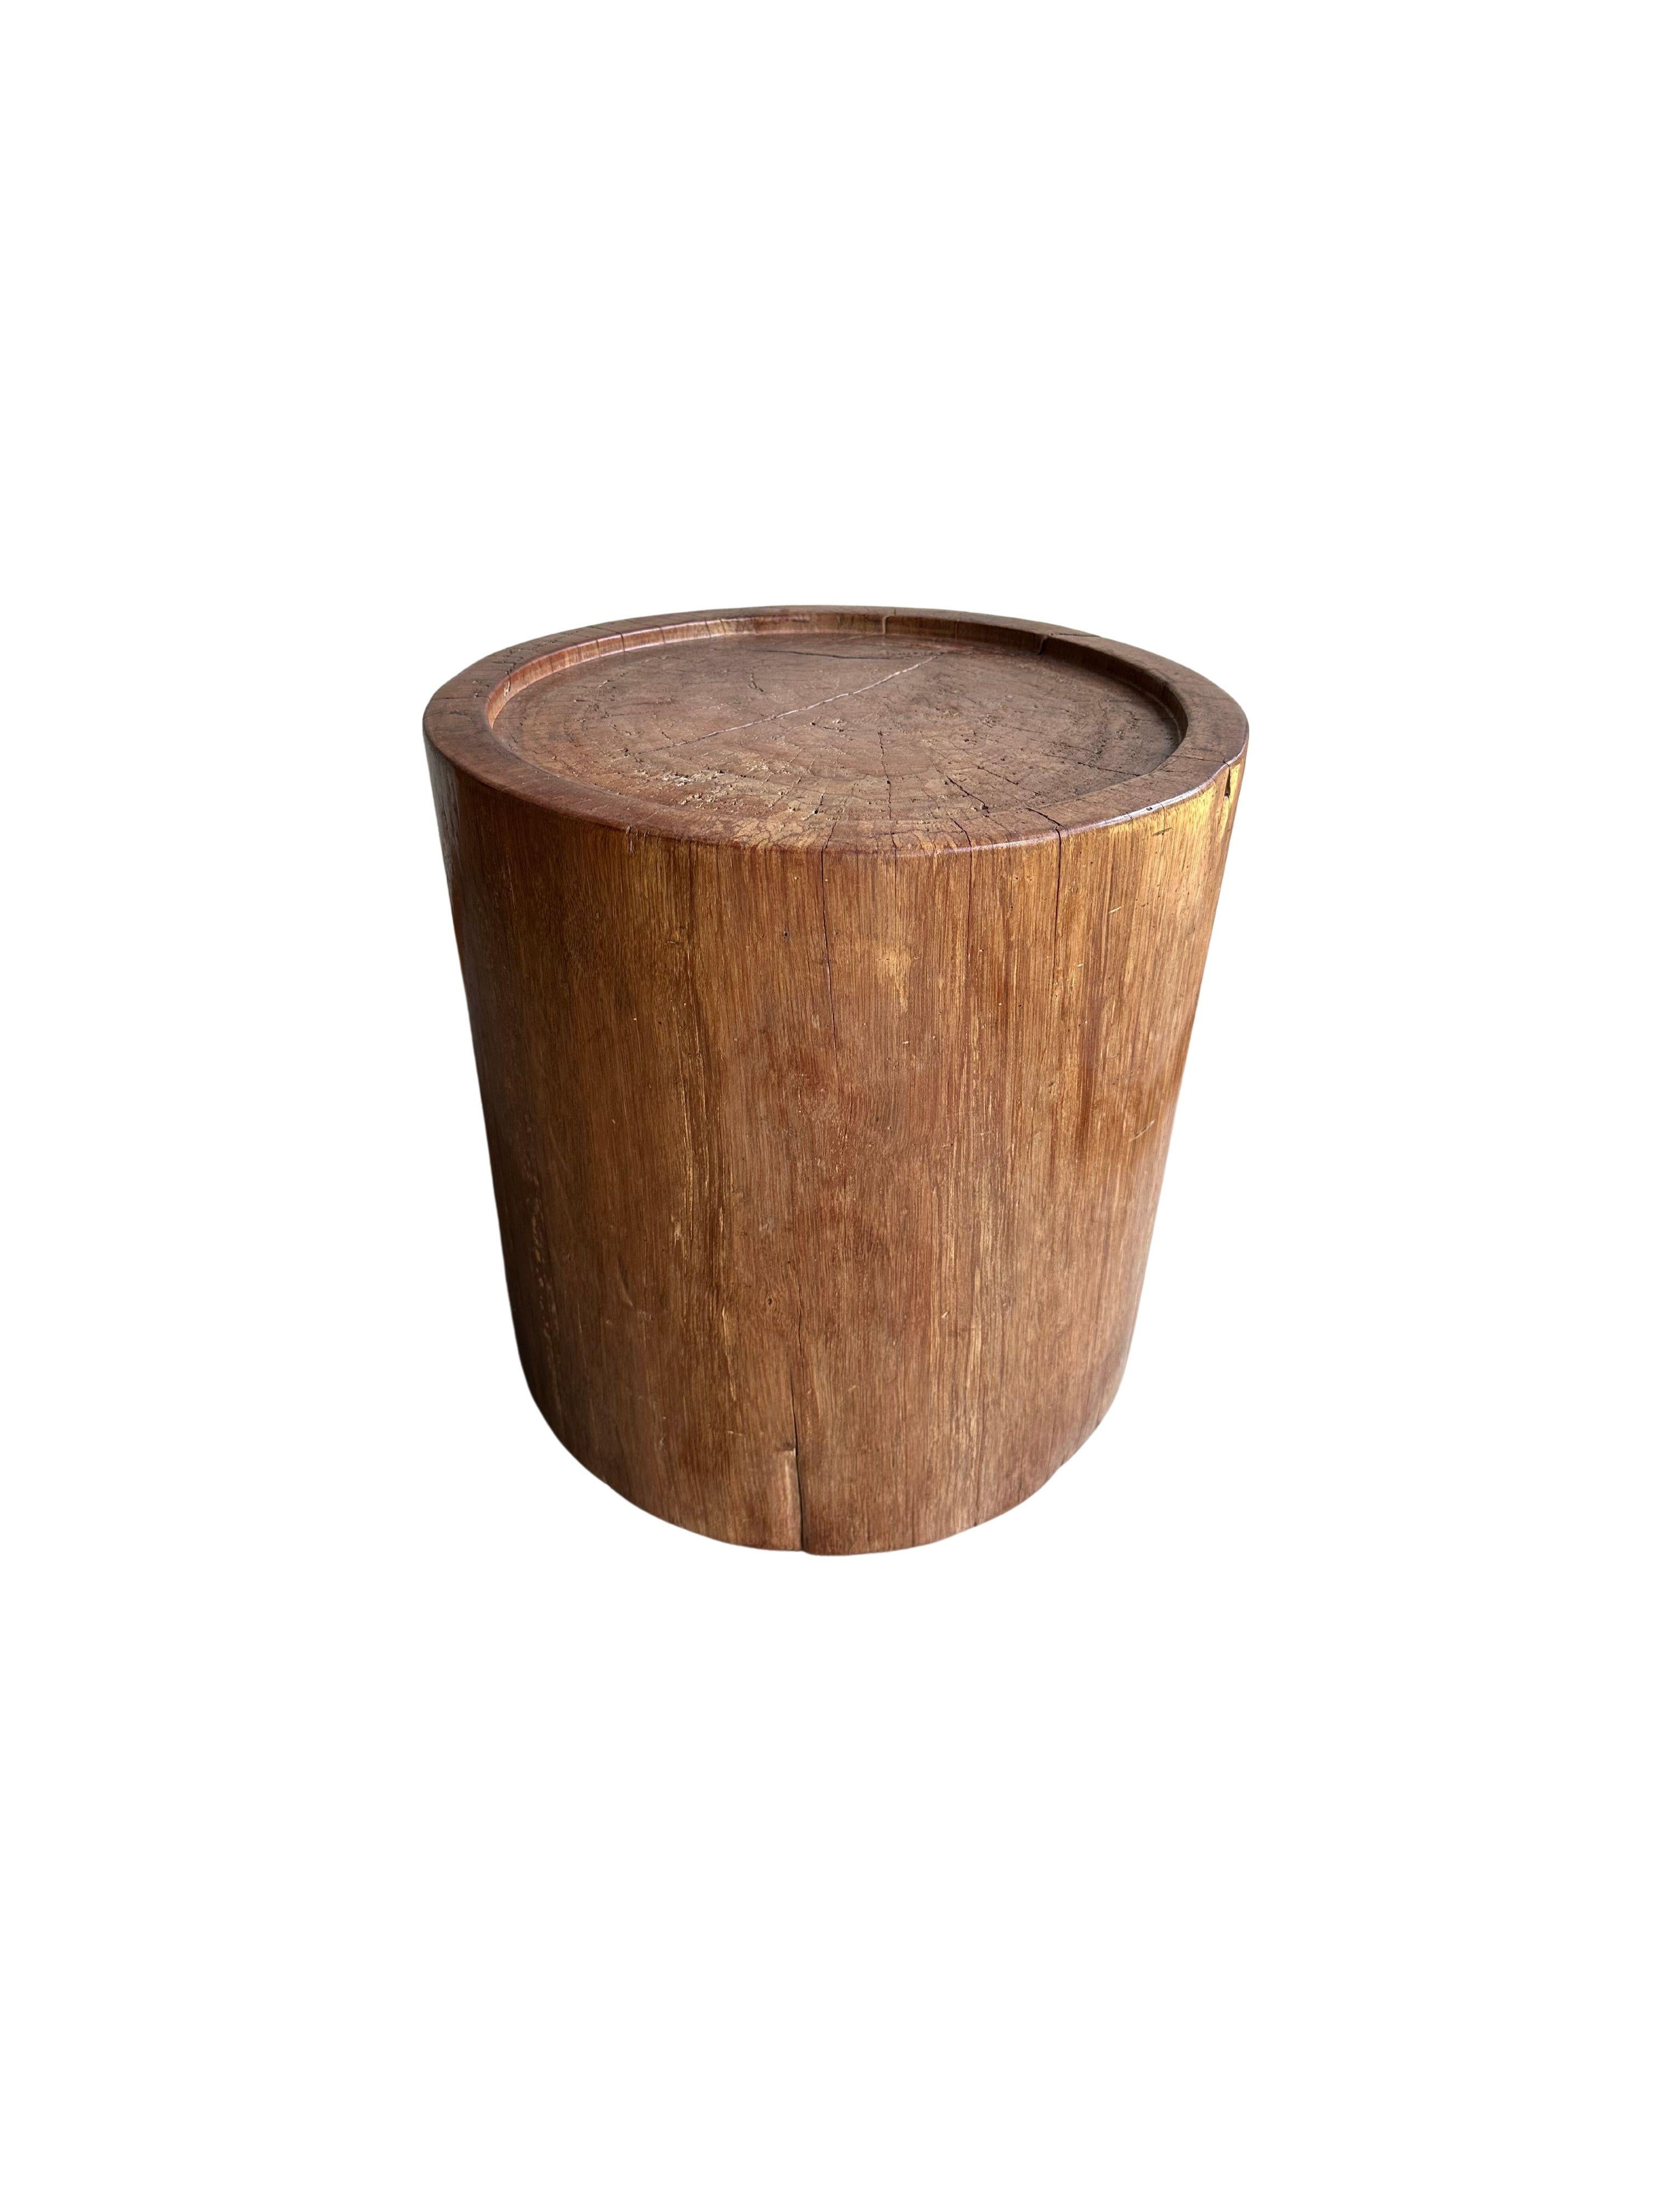 Hand-Crafted Sculptural Meranti Wood Side Table, with Stunning Wood Textures, Modern Organic For Sale